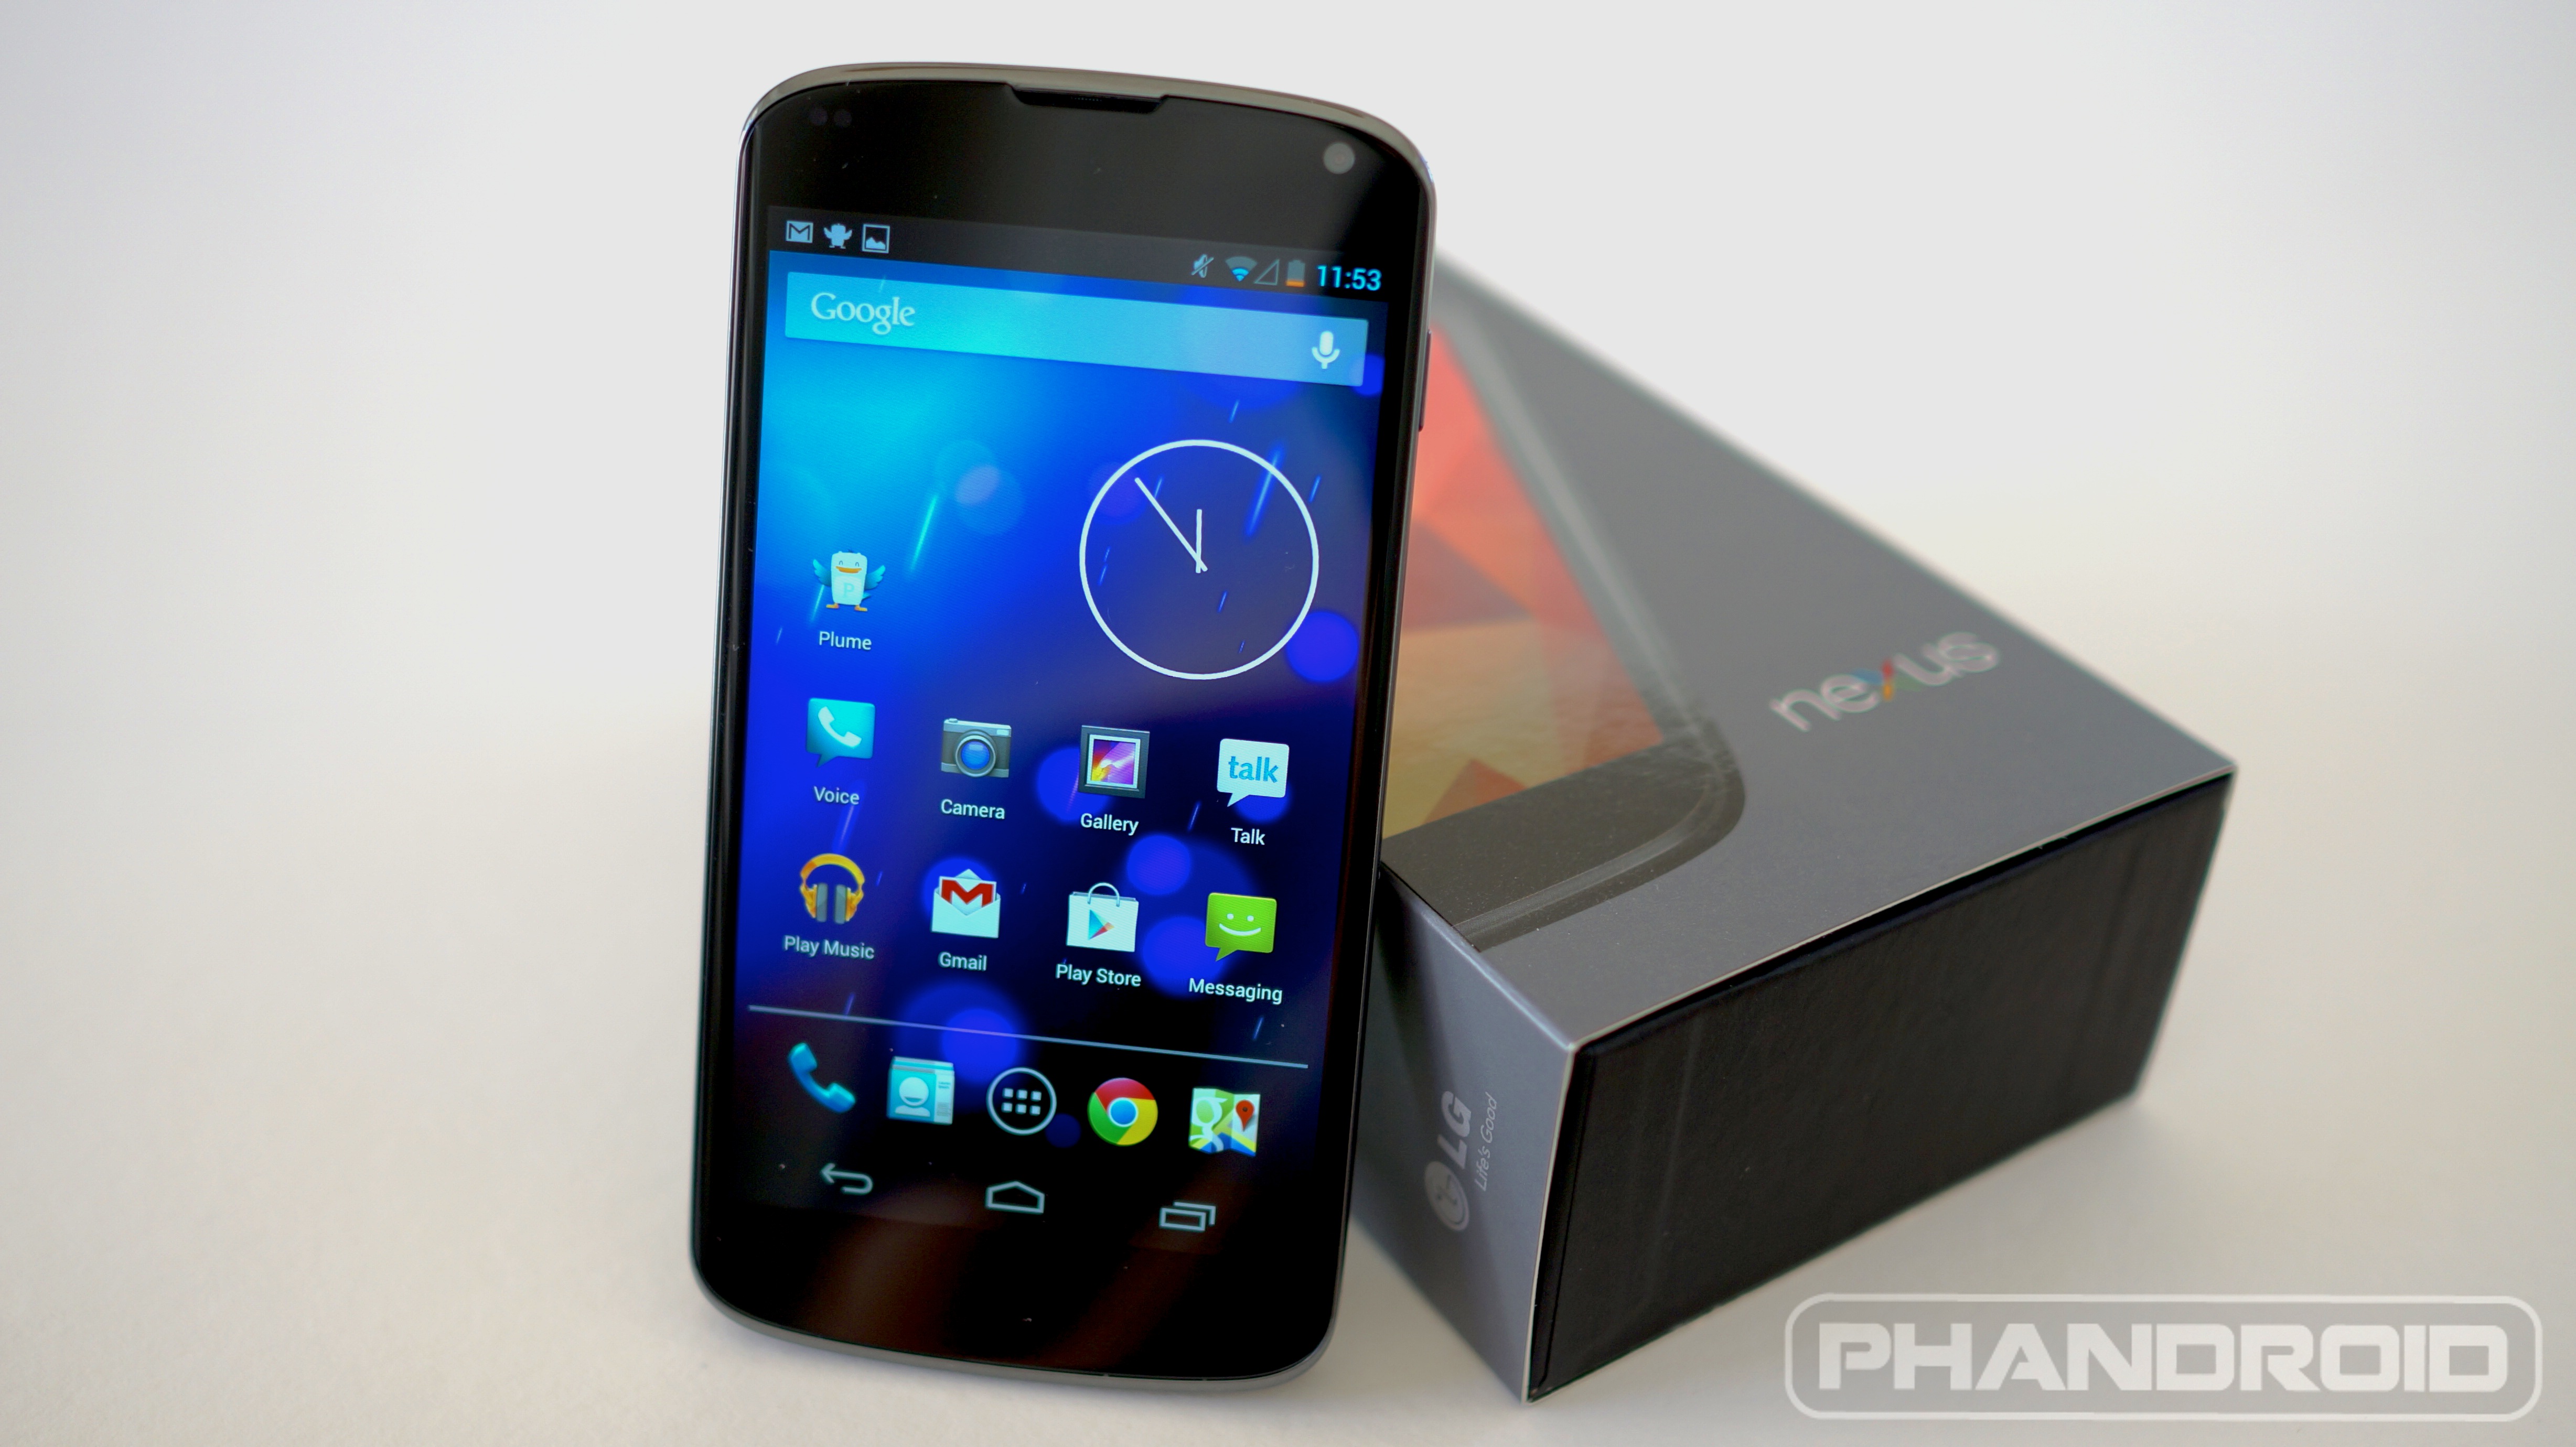 Nexus 4 Review: Budget-Friendly Yet High-End